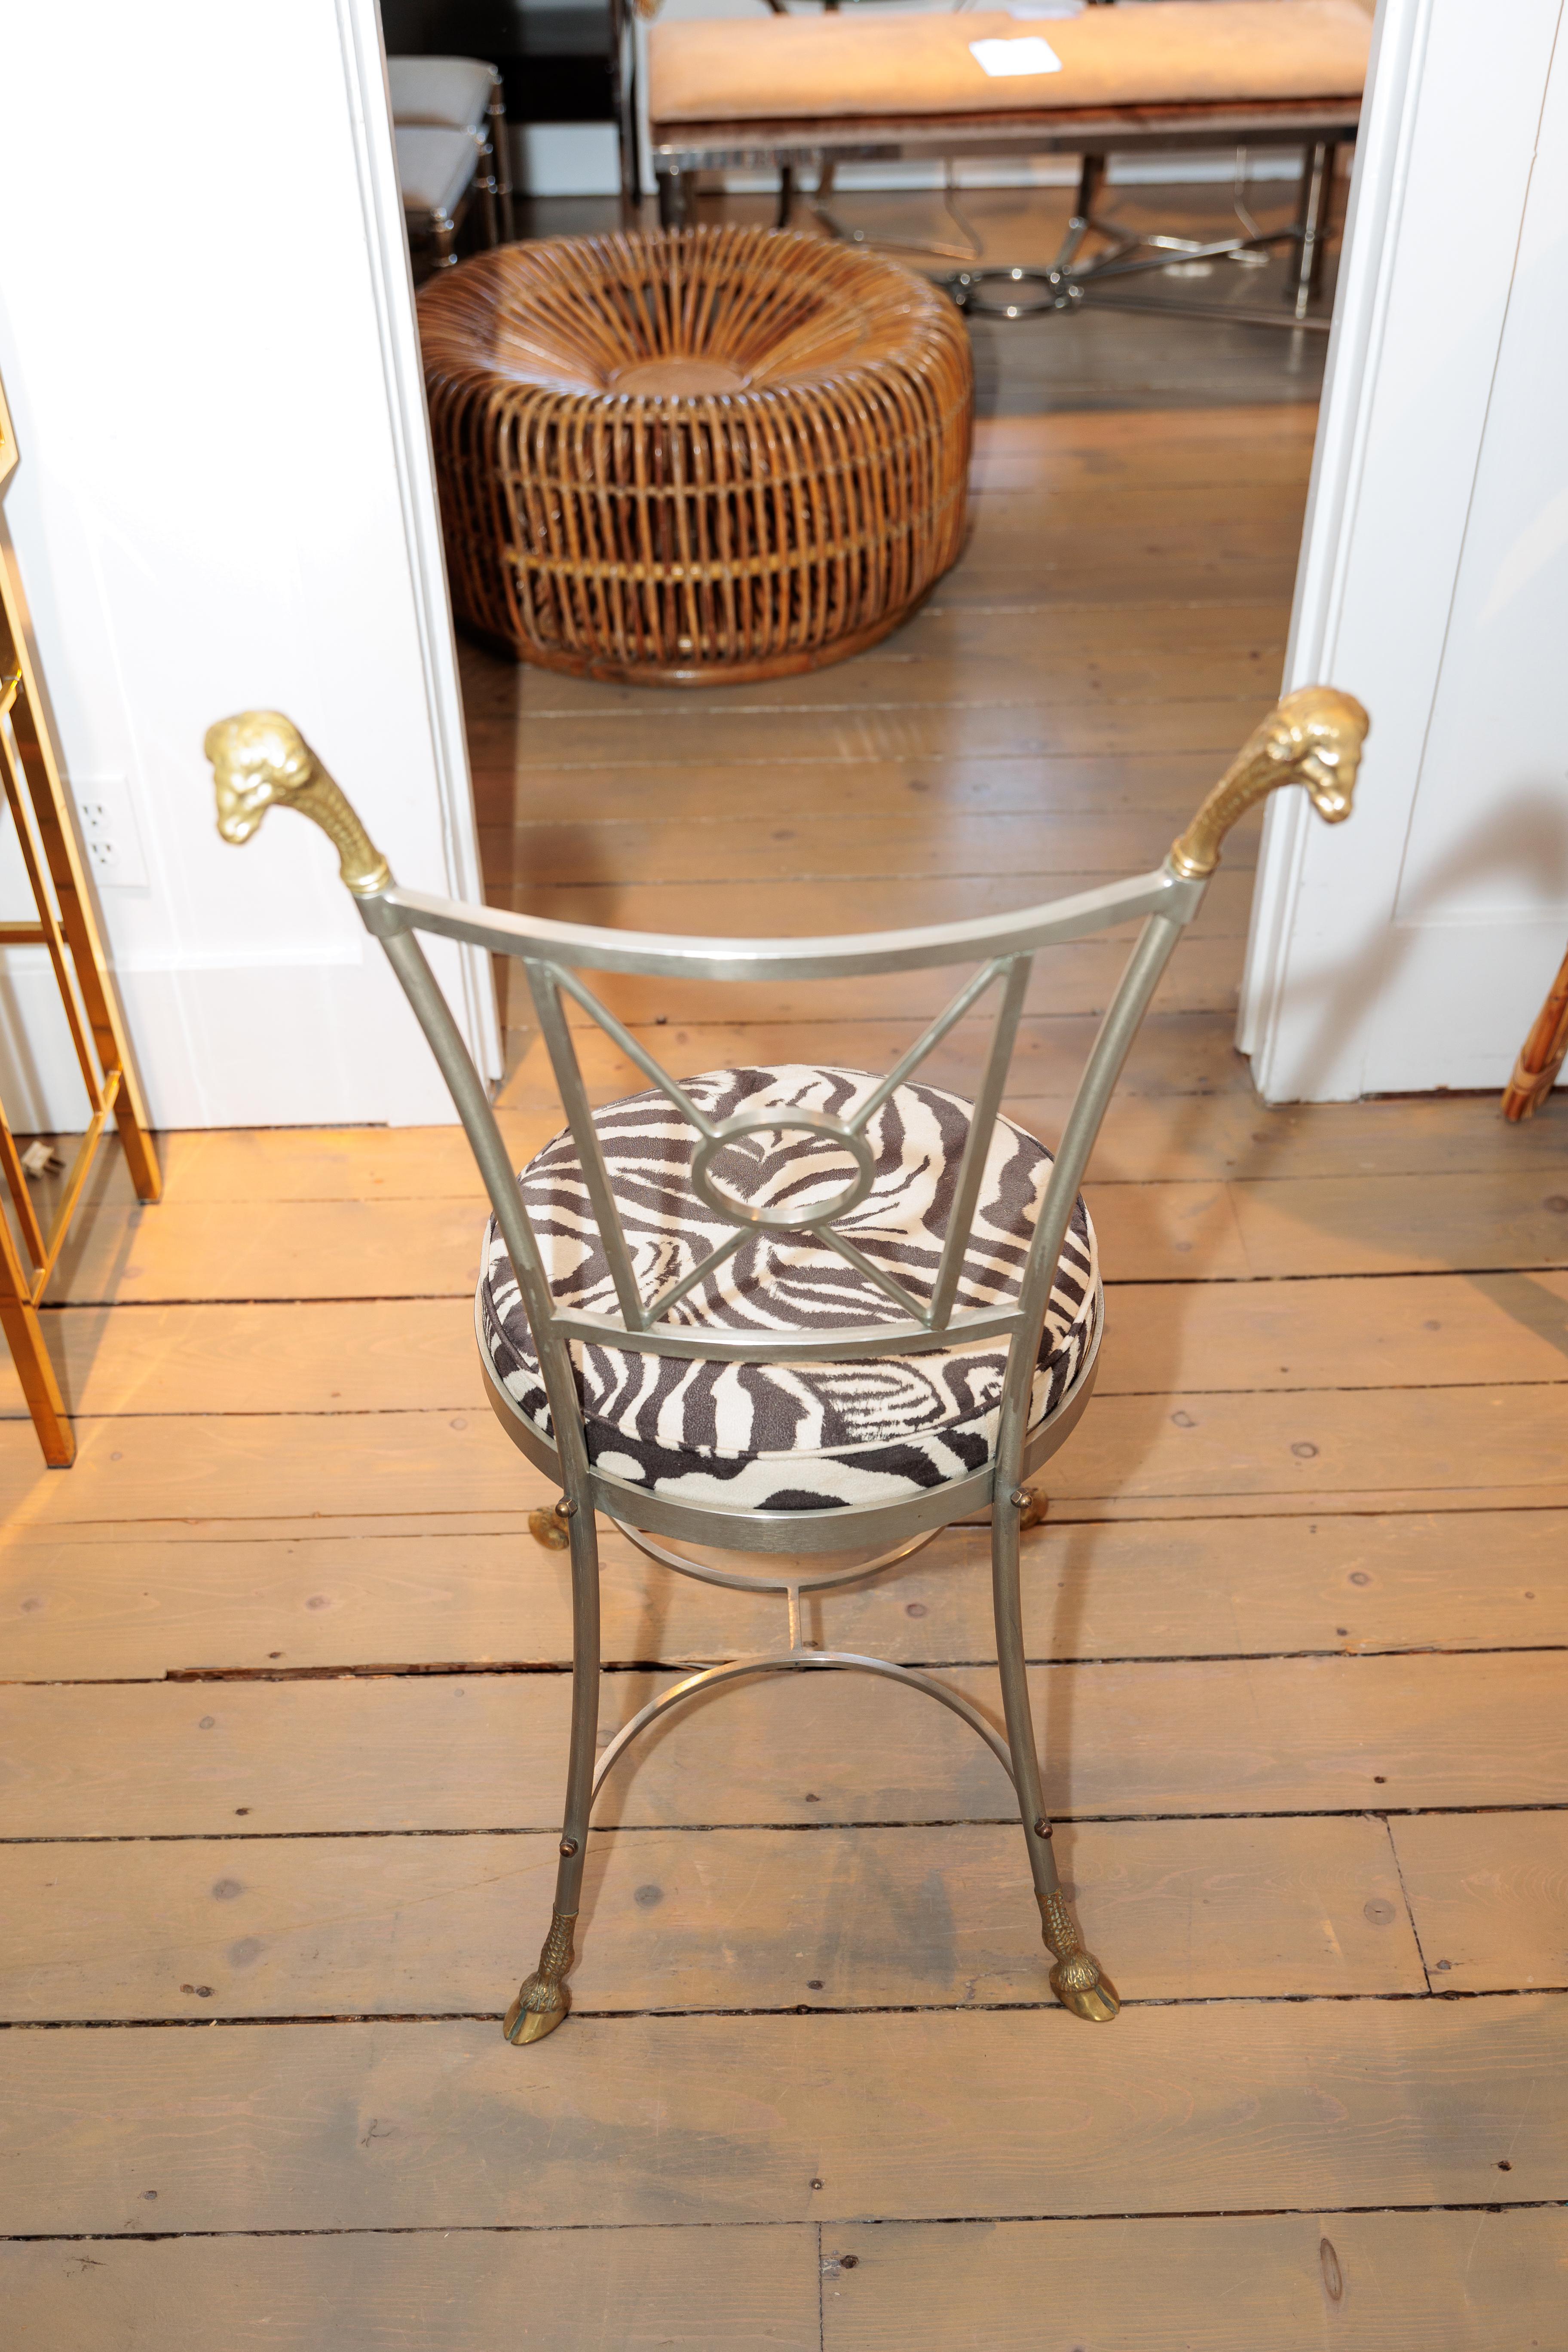 This chair has such unique details with Ram's head and hoofs.
Upholstered in cotton Zebra pattern.